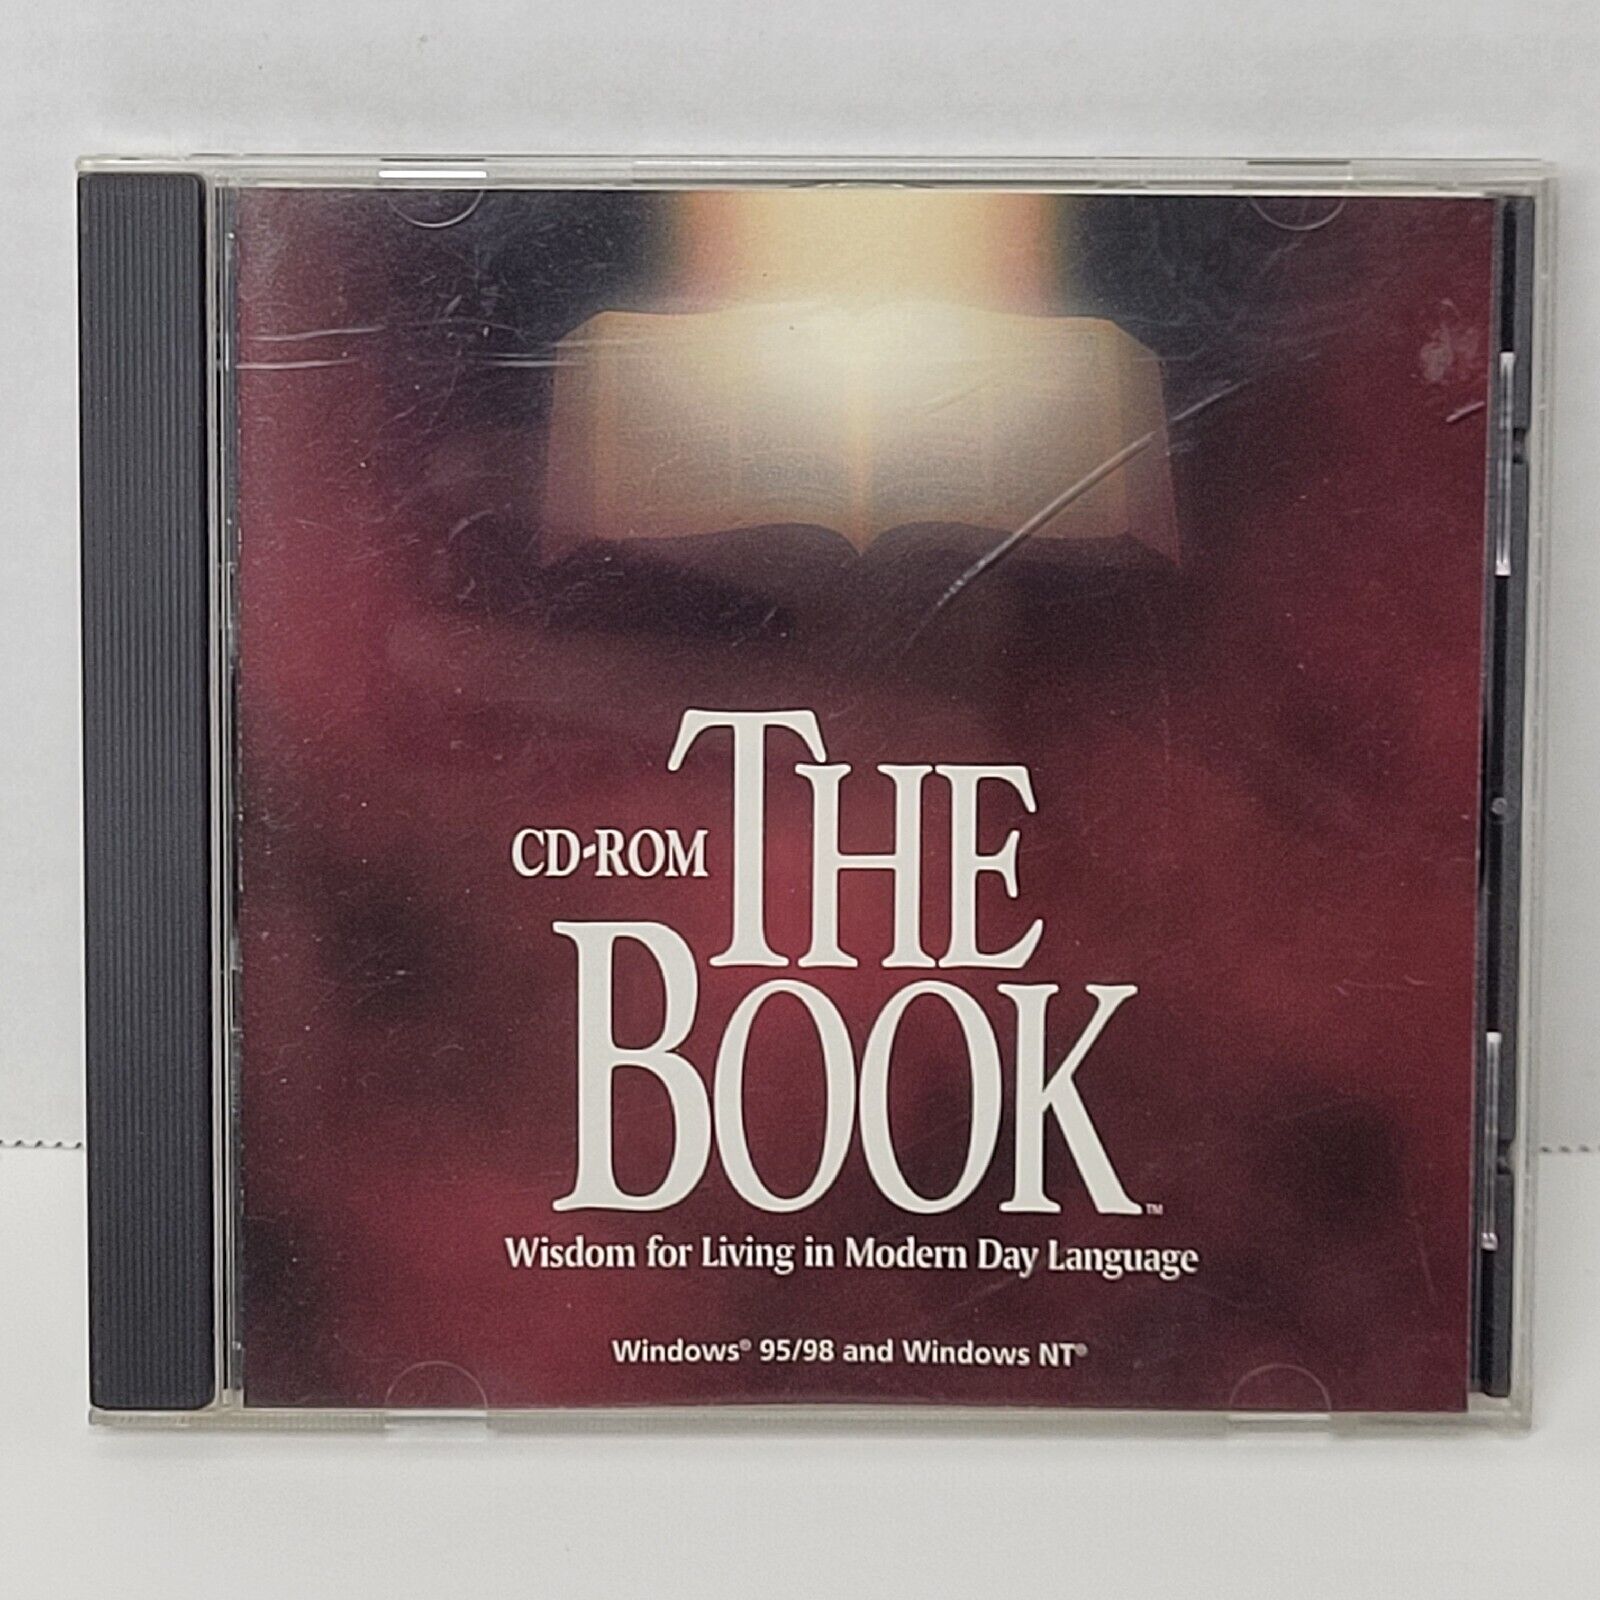 The Book 1999 CD-ROM Holy Bible Wisdom For Living In Modern Language Windows 98